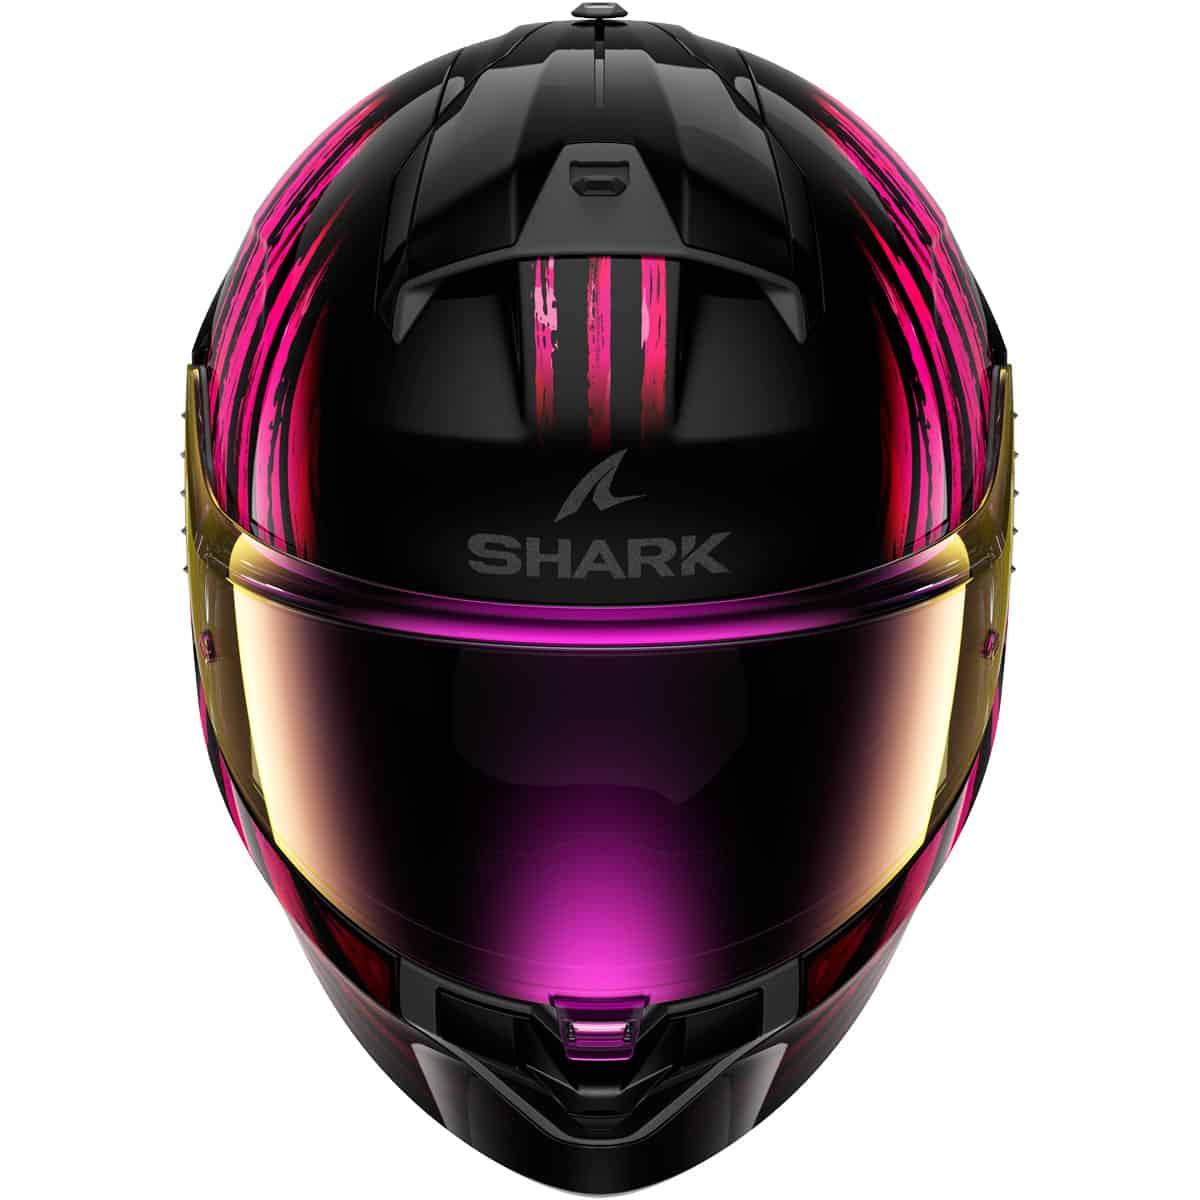 Experience Shark's latest iteration of the Ridill 2 helmet--an all-new design with streetwear style and exceptional features